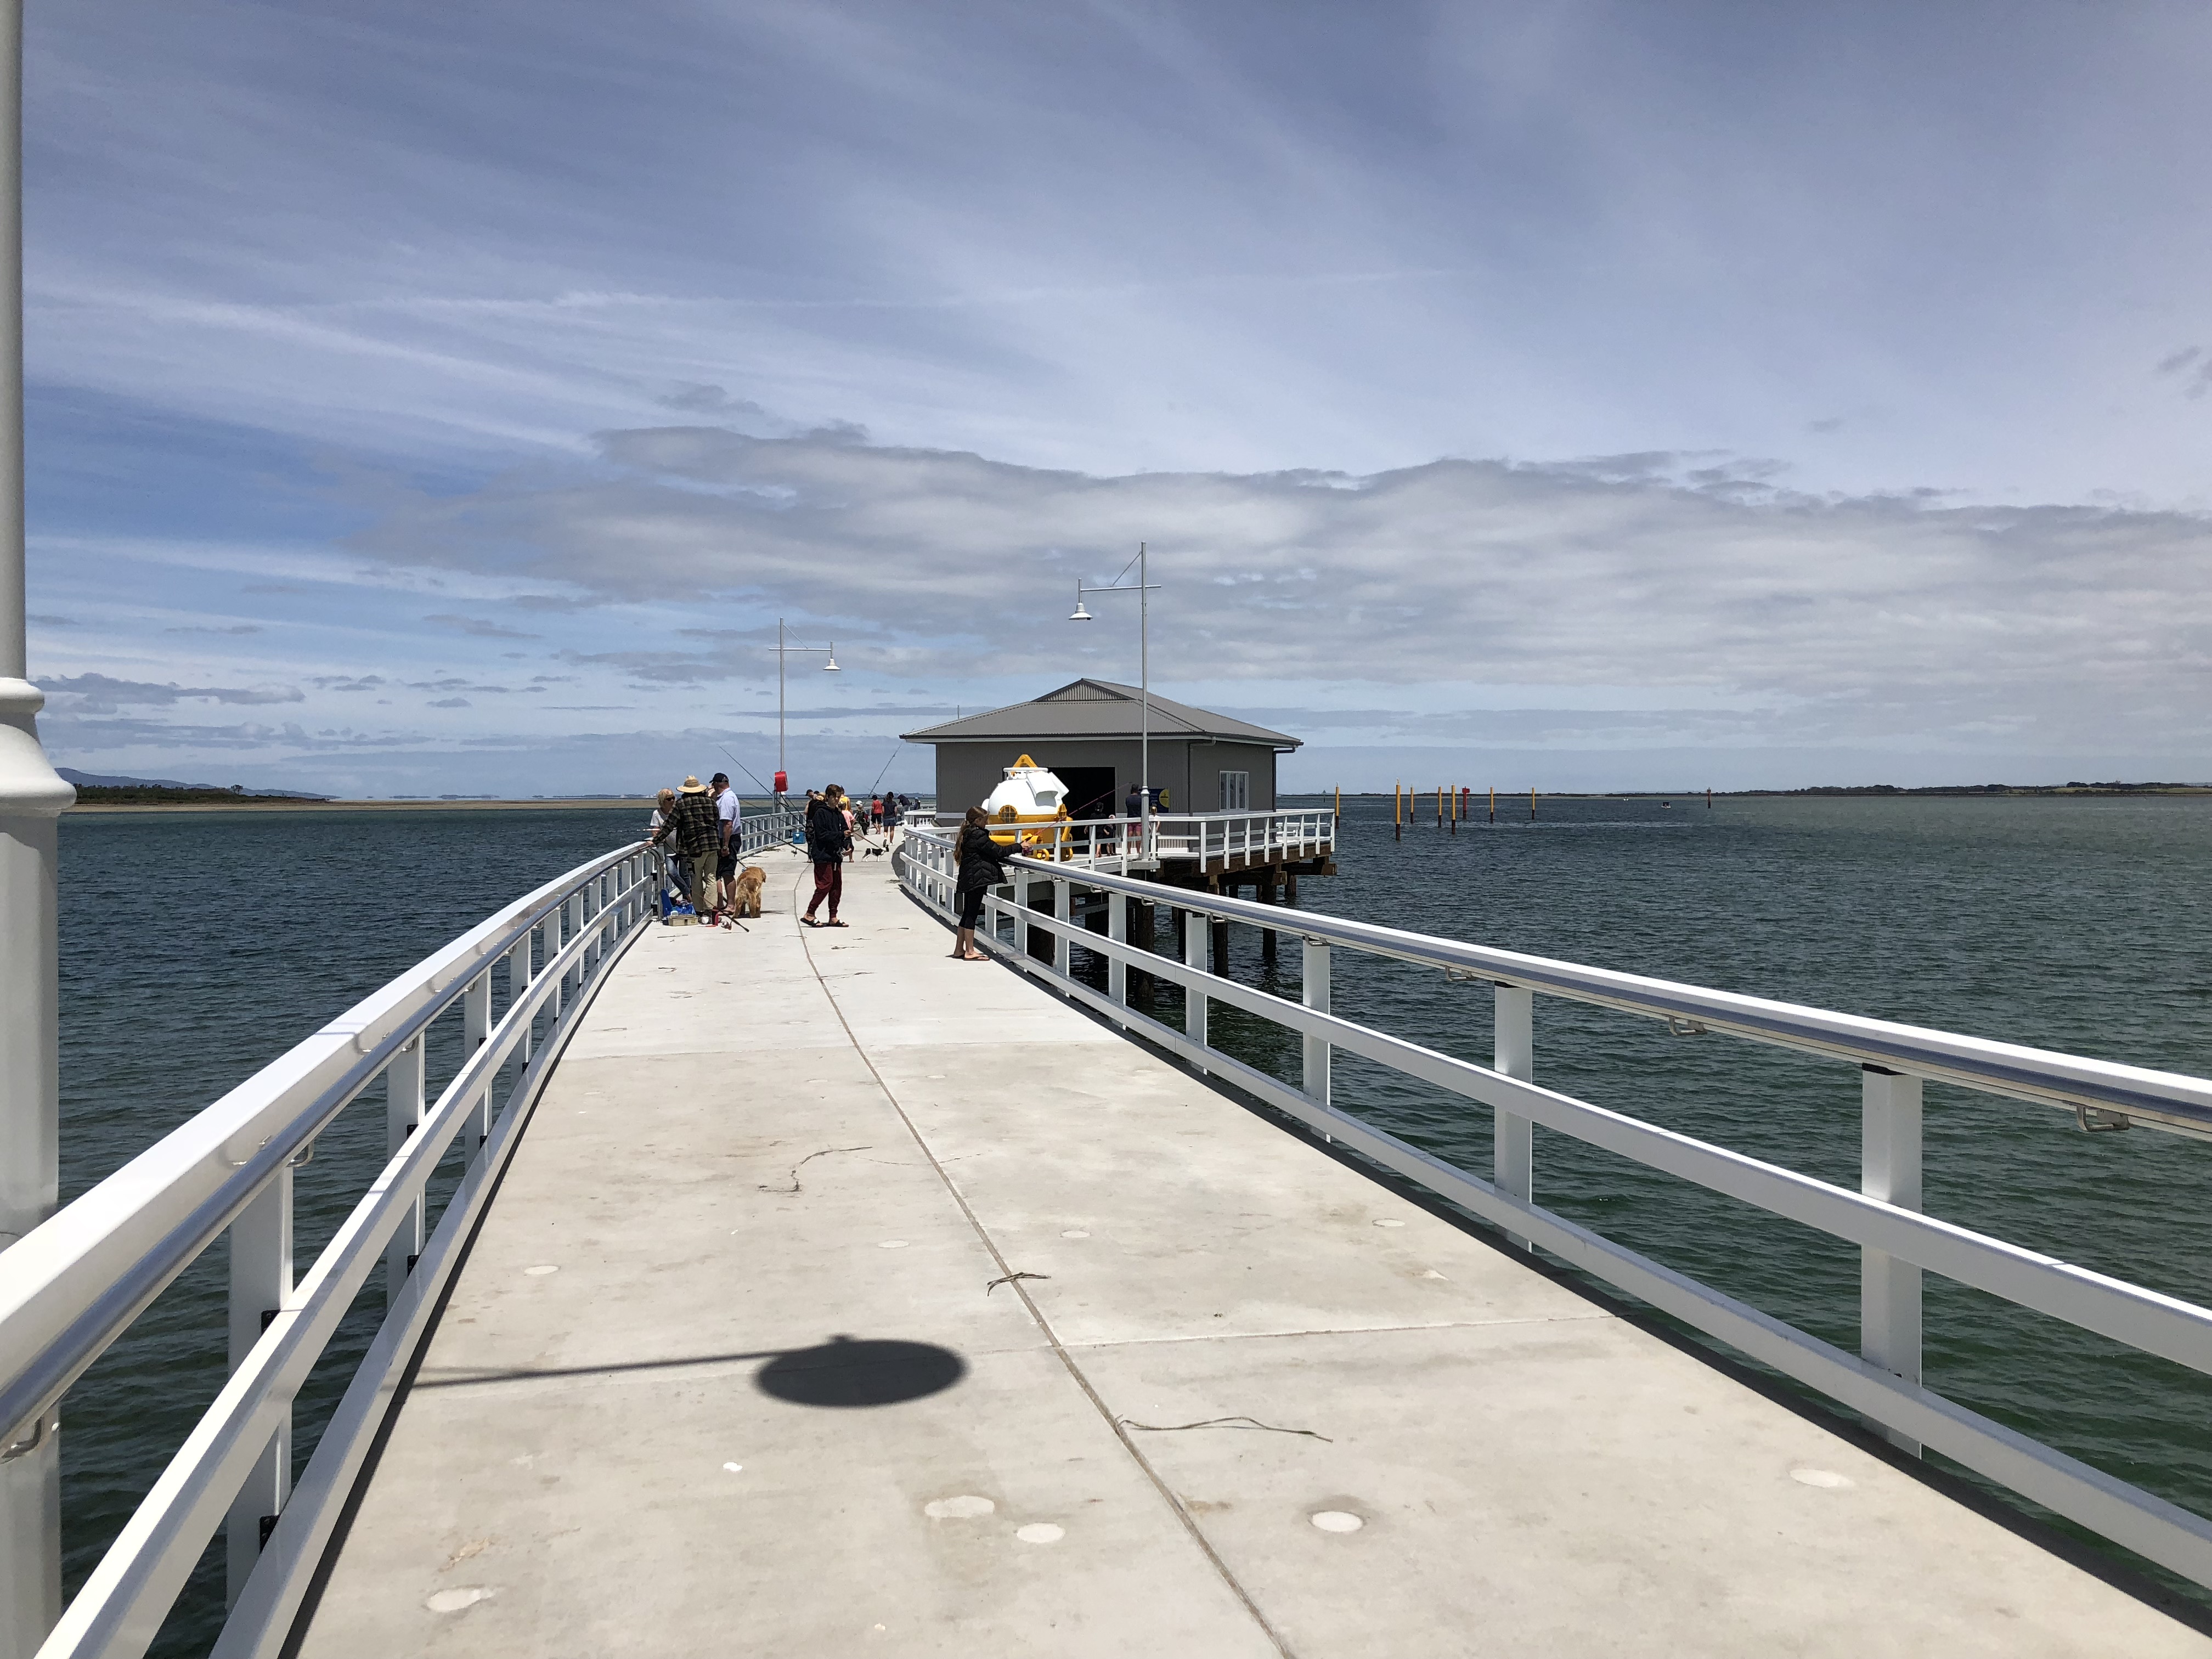 The Long Jetty - December 2018 - unofficially open for business